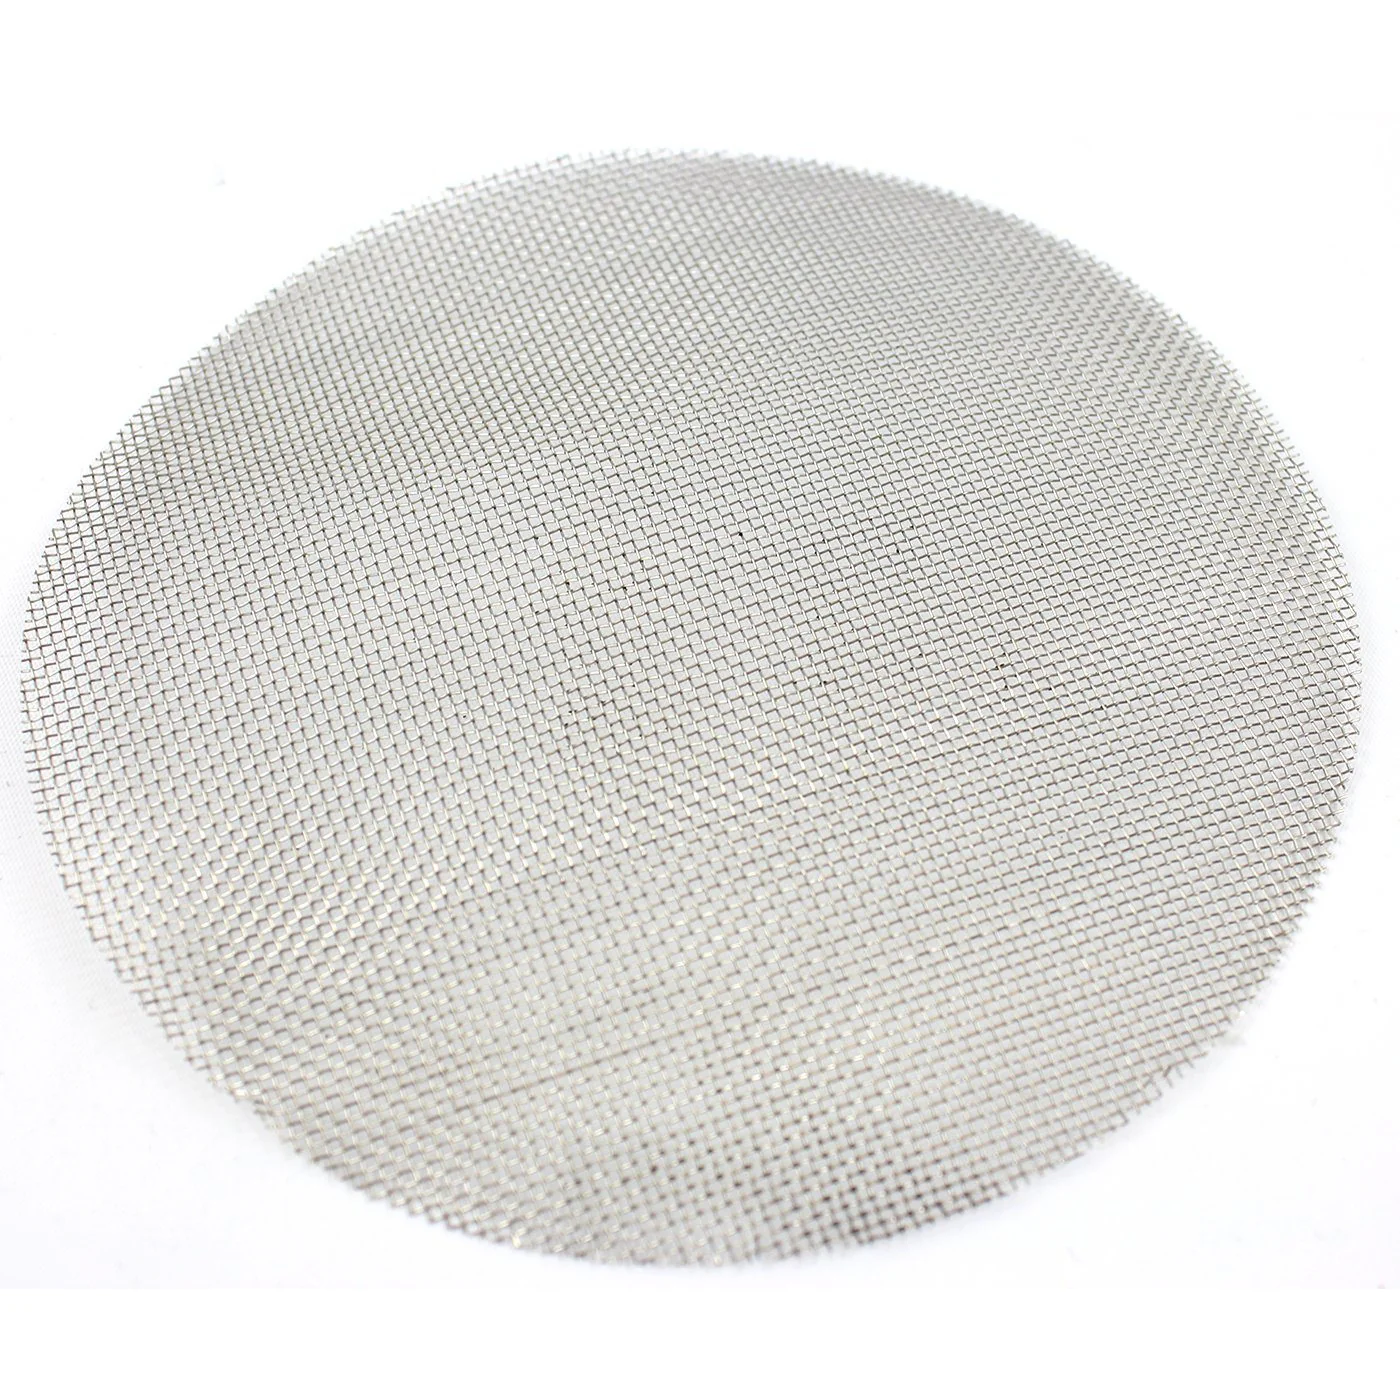 Pre-Cut Stainless Steel Mesh for Tri-Clamp Filter Plates 100 Mesh (150 Micron) Questions & Answers